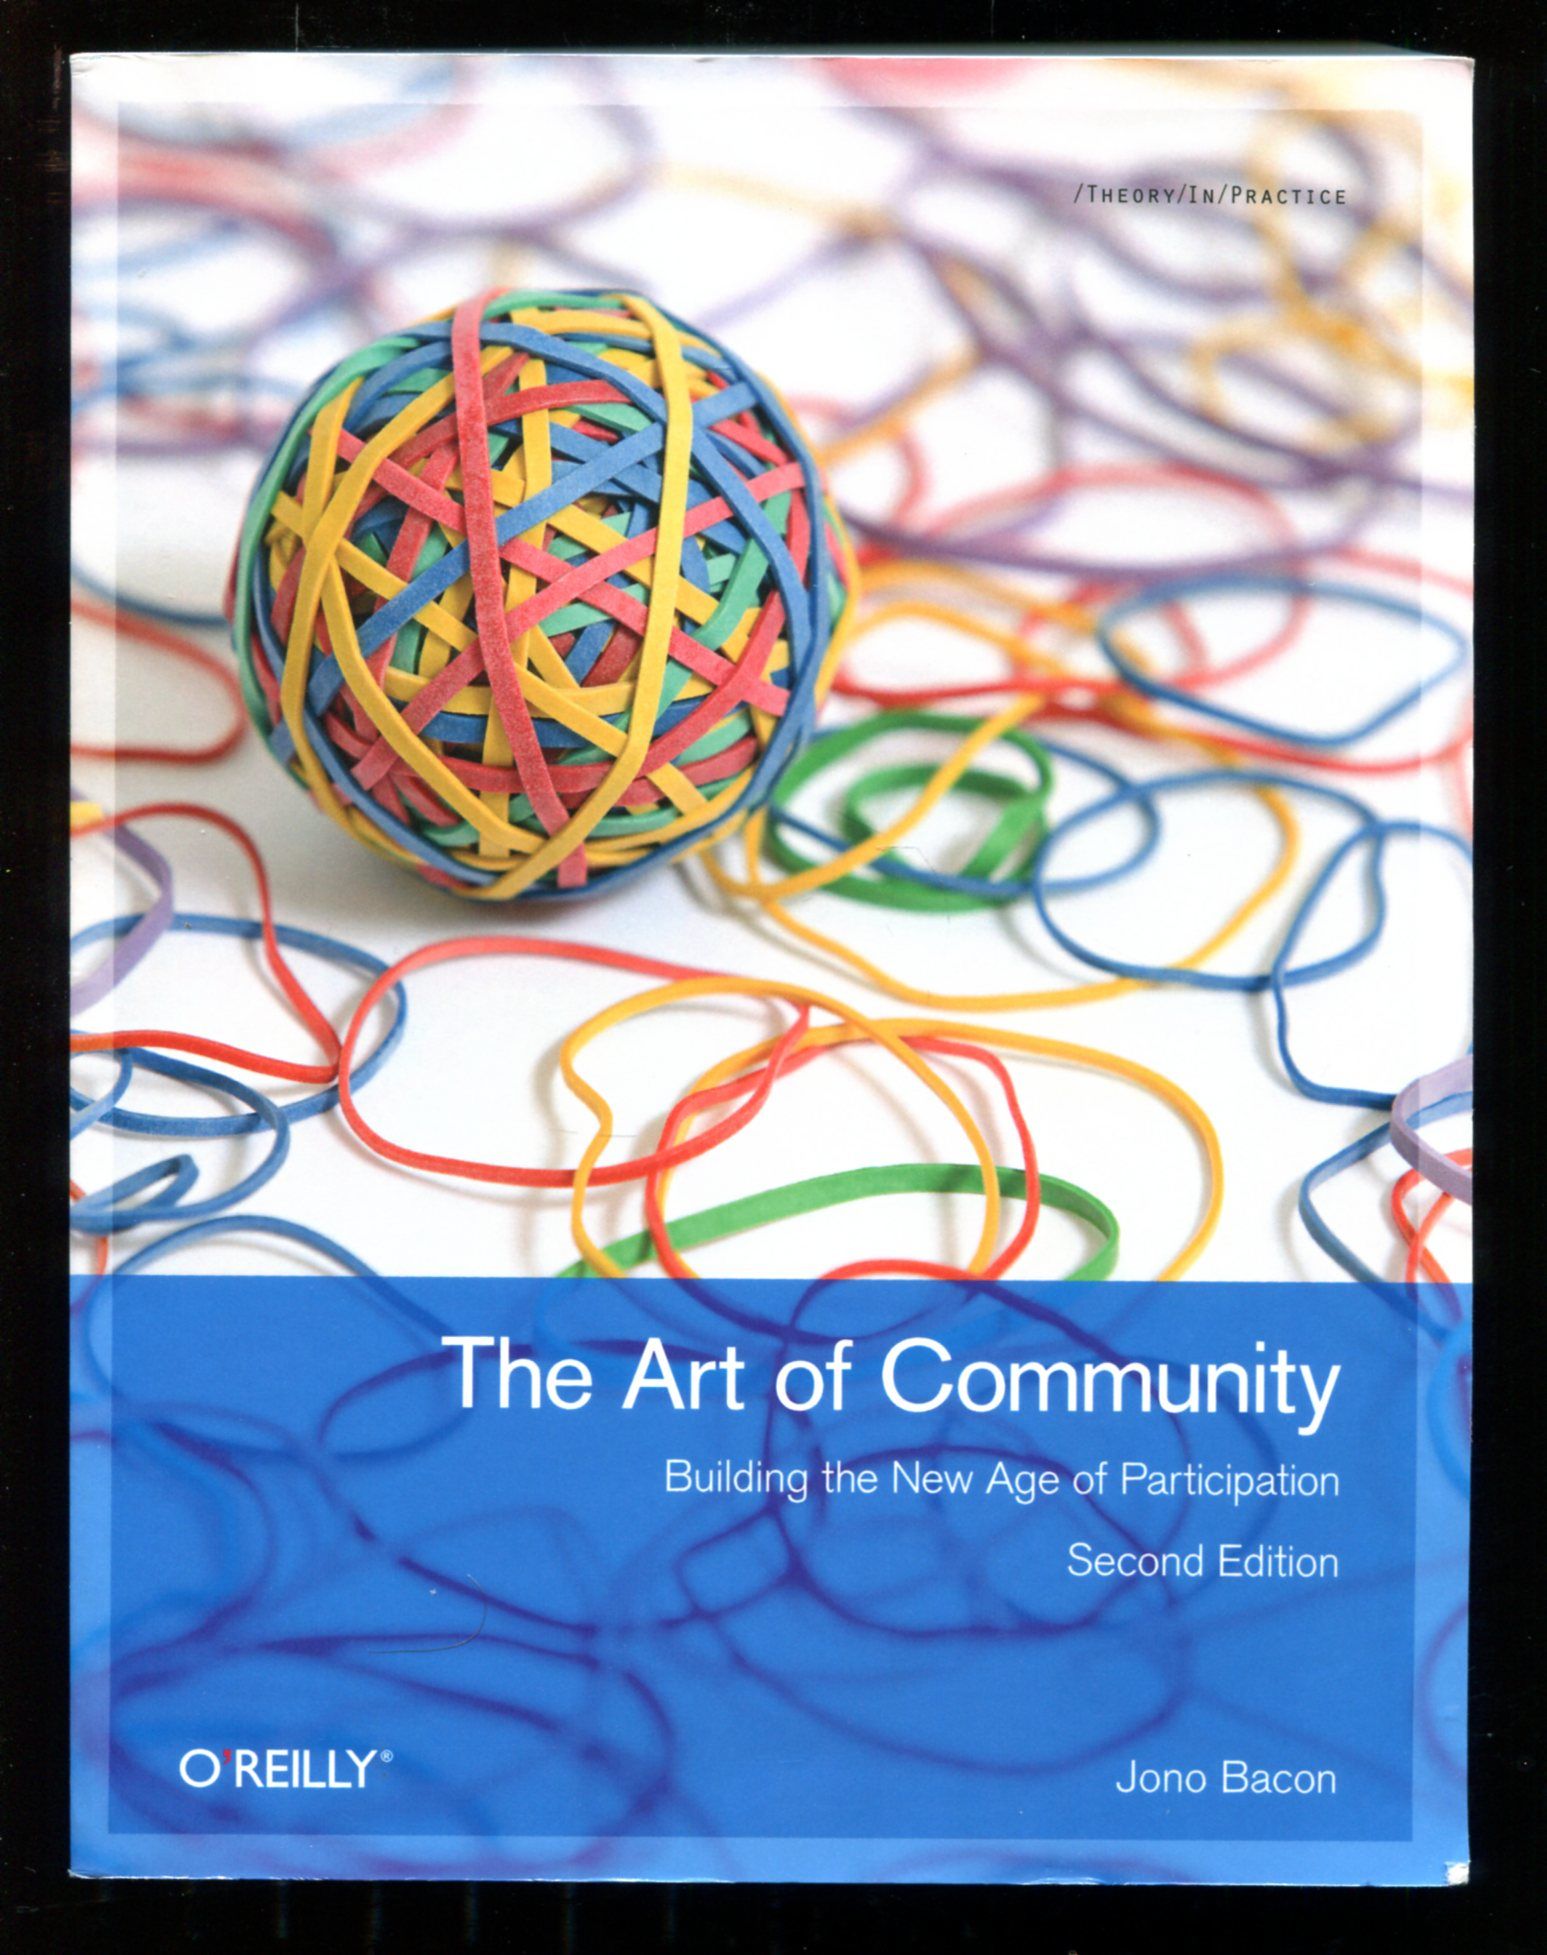 The Art of Community (Paperback, 2009, O'Reilly)